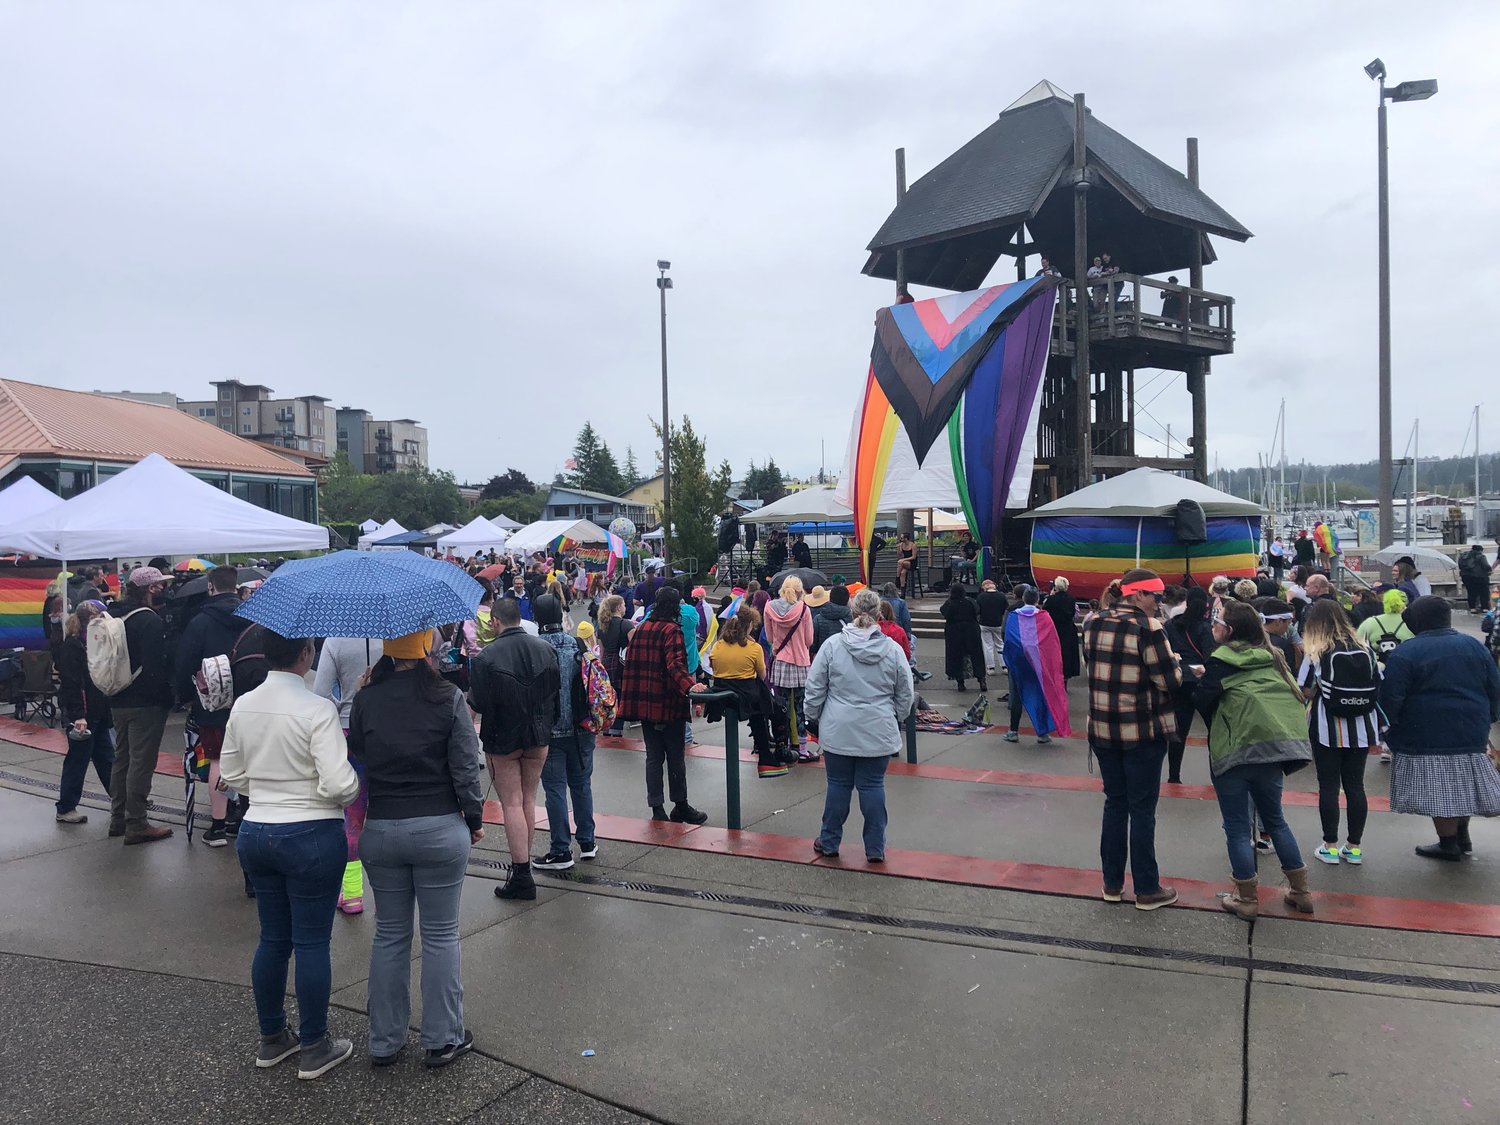 The main stage at Capital City Pride Day at the Port Plaza featured various entertainers, with most timeslots only 15 minutes long.